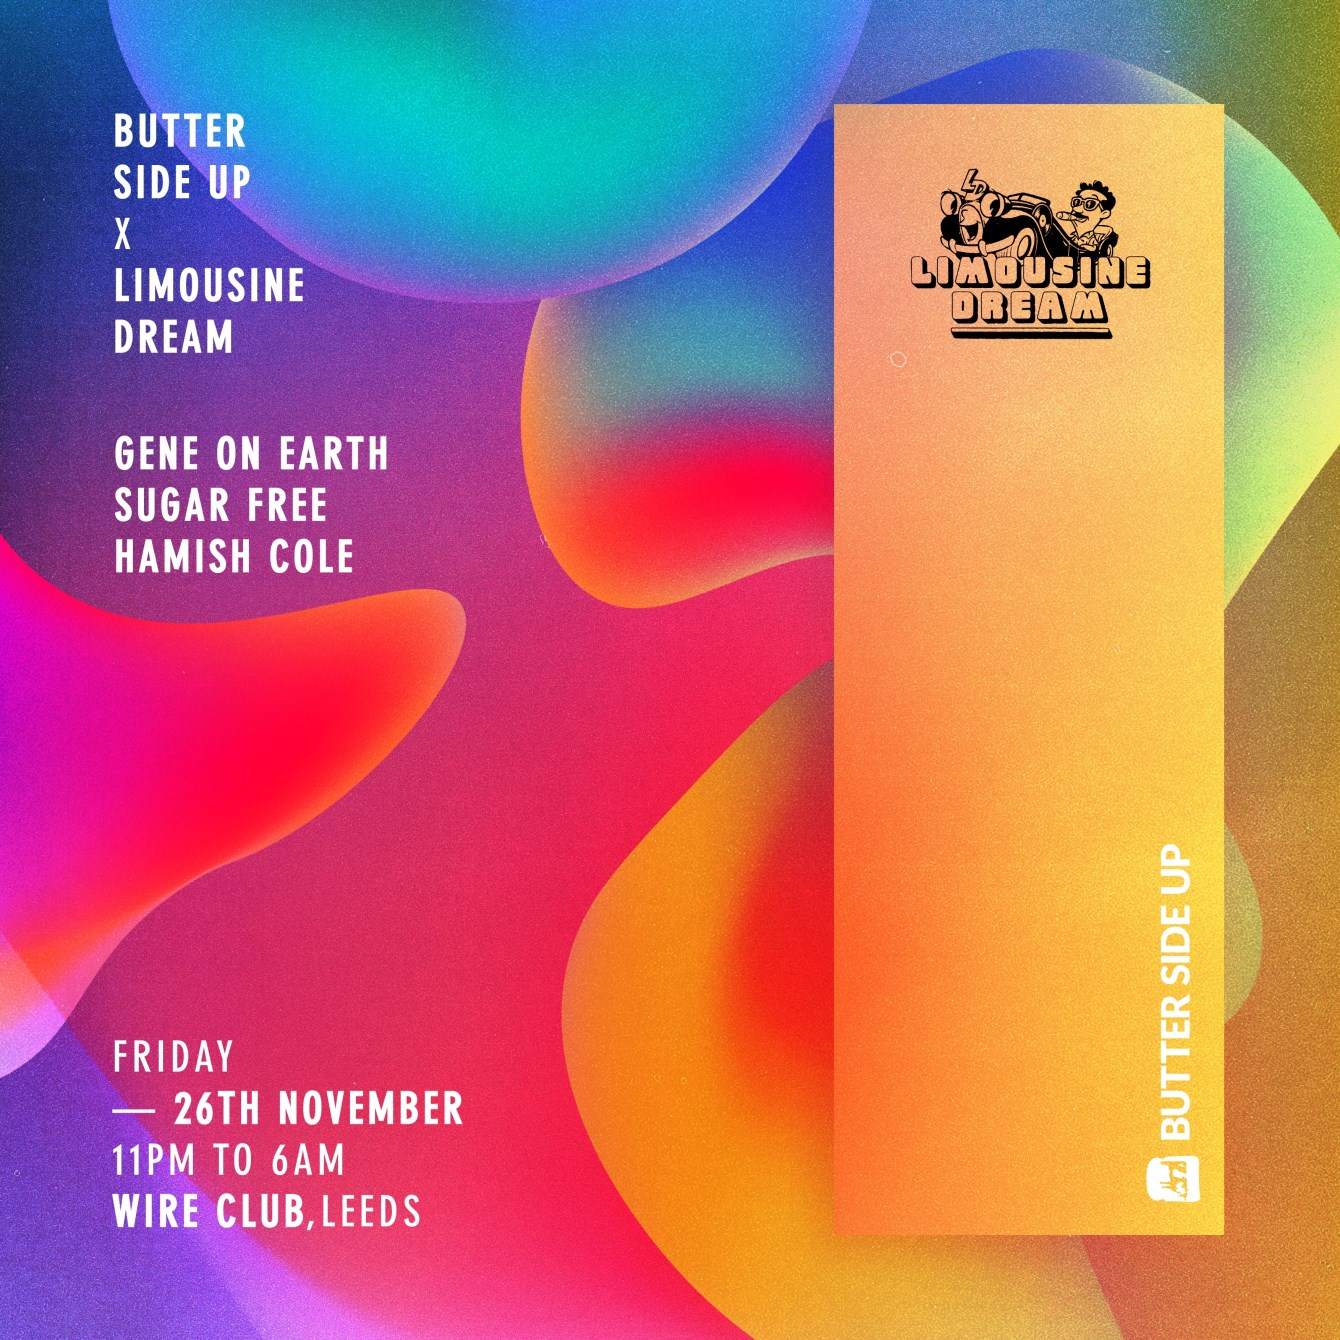 Butter Side Up x Limousine Dream with Gene On Earth, Sugar Free & Hamish Cole - Página frontal